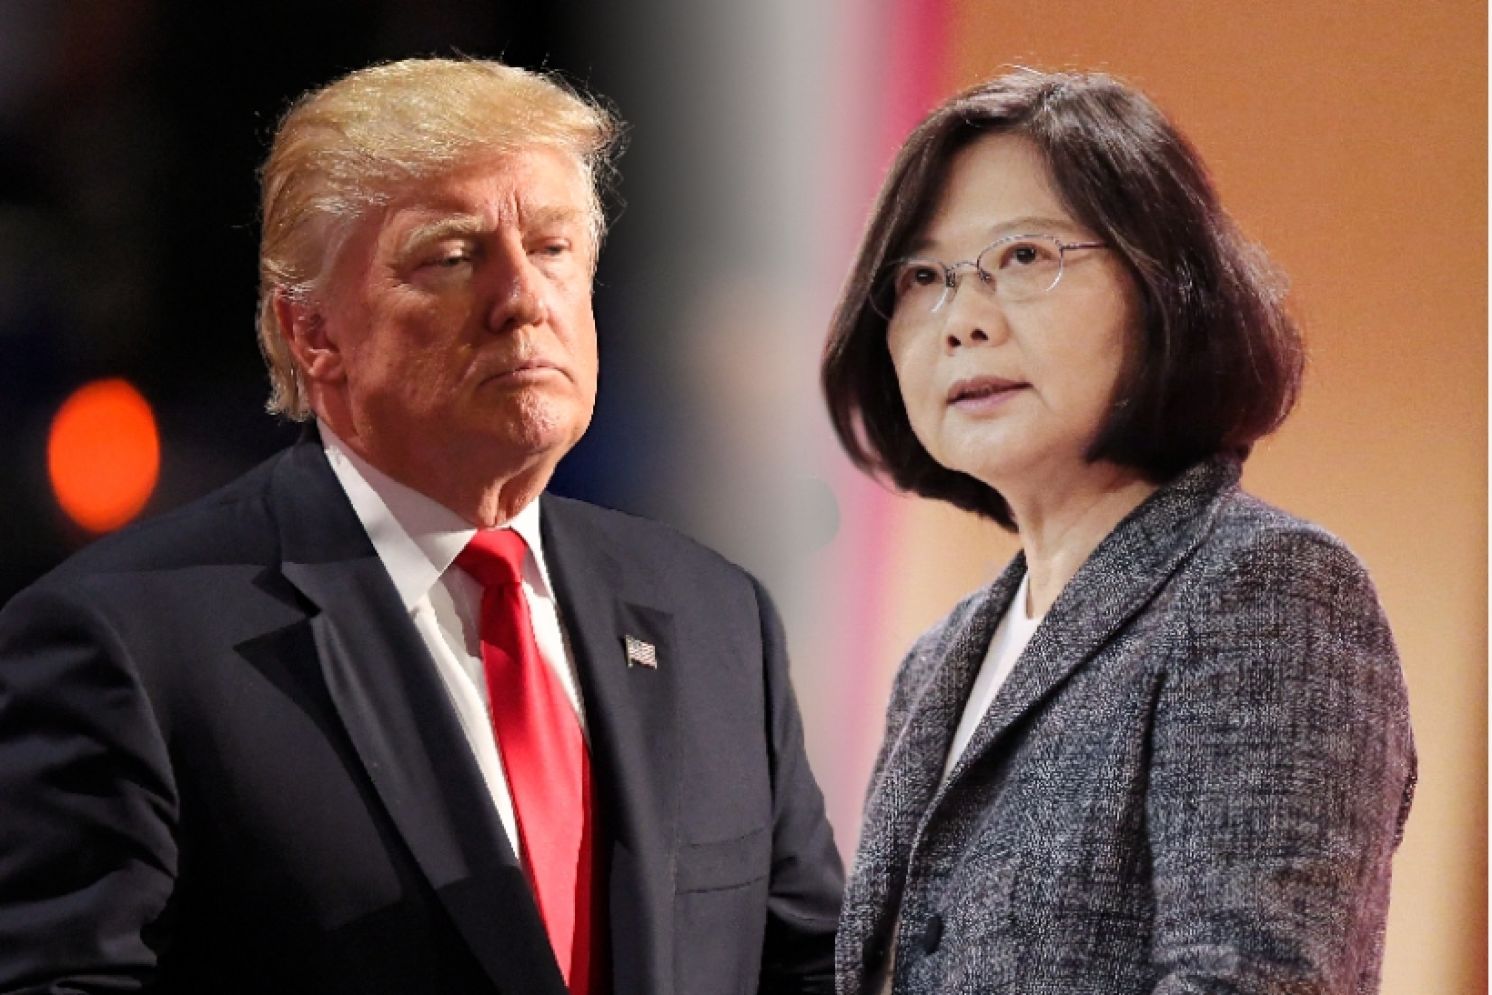 Taiwan Full of Trump Fans, Extremely Unwise to Gamble